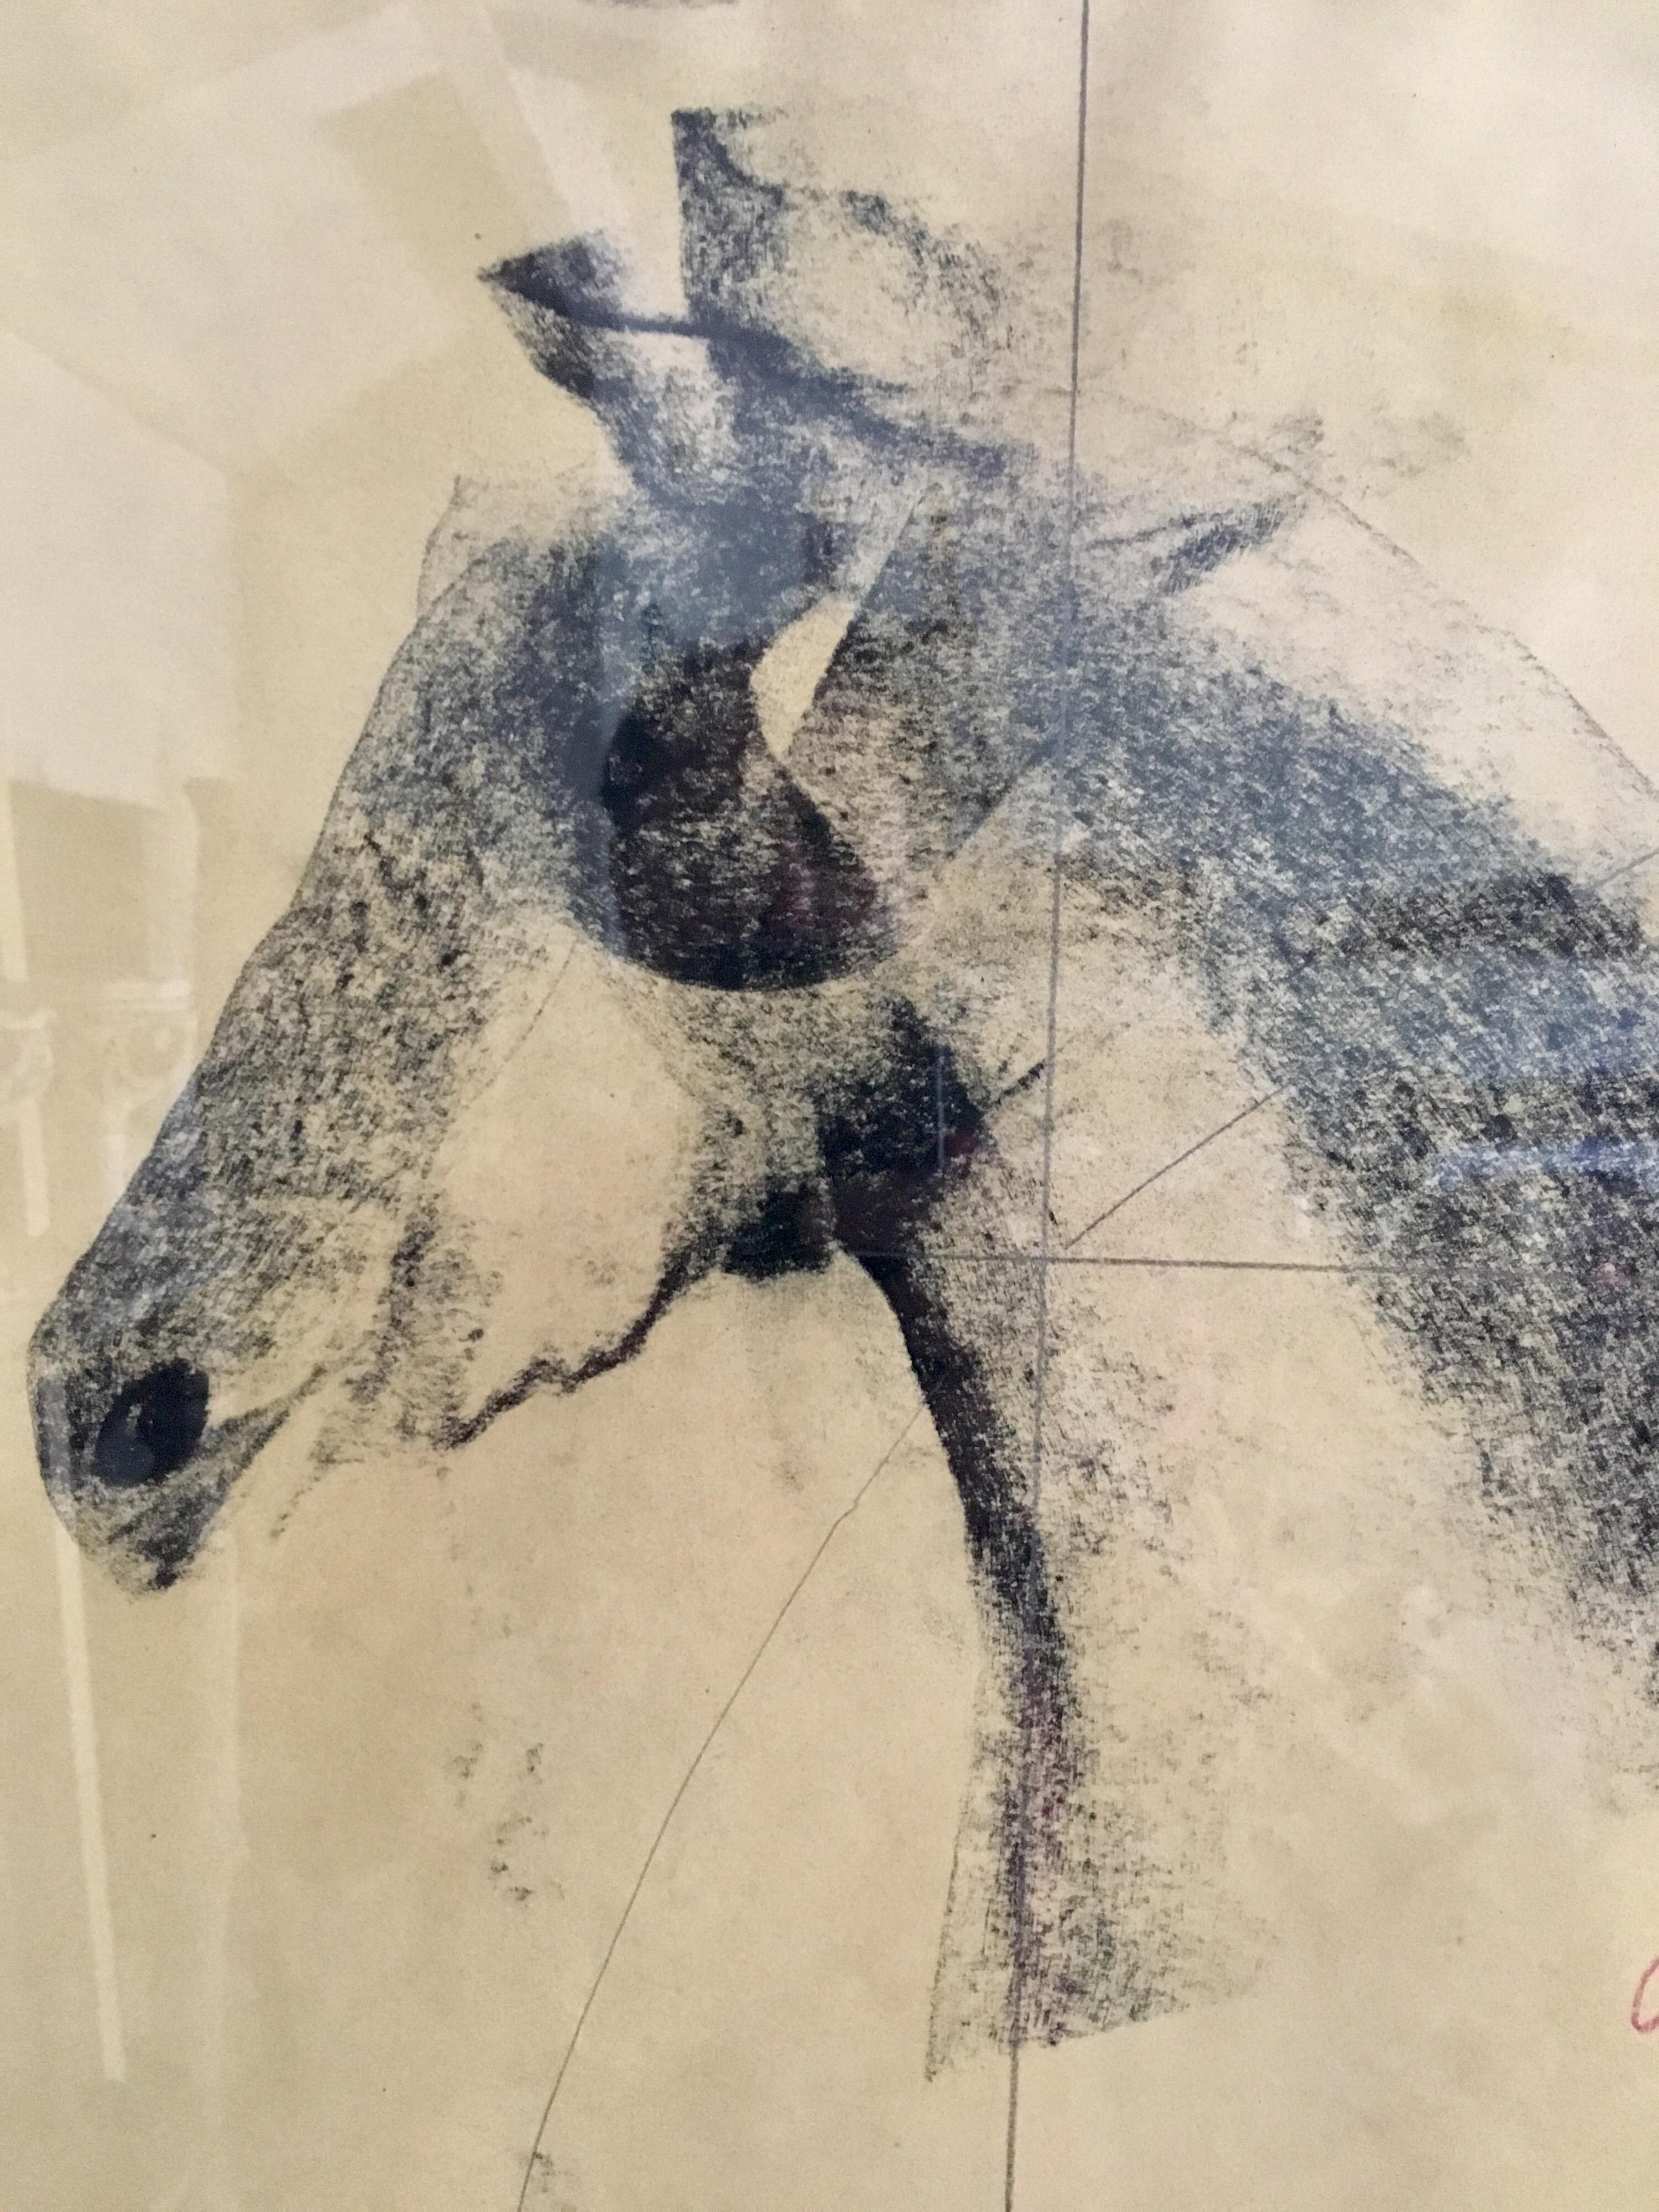 Original charcoal on paper. Study of a horse. Juan Carlos Cazares was born in Queretaro, Mexico in 1976. In 1997 he won the prize for young adults at the Queretaro Museum of Art. Juan Carlos has continually exhibited in San Miguel Allende,